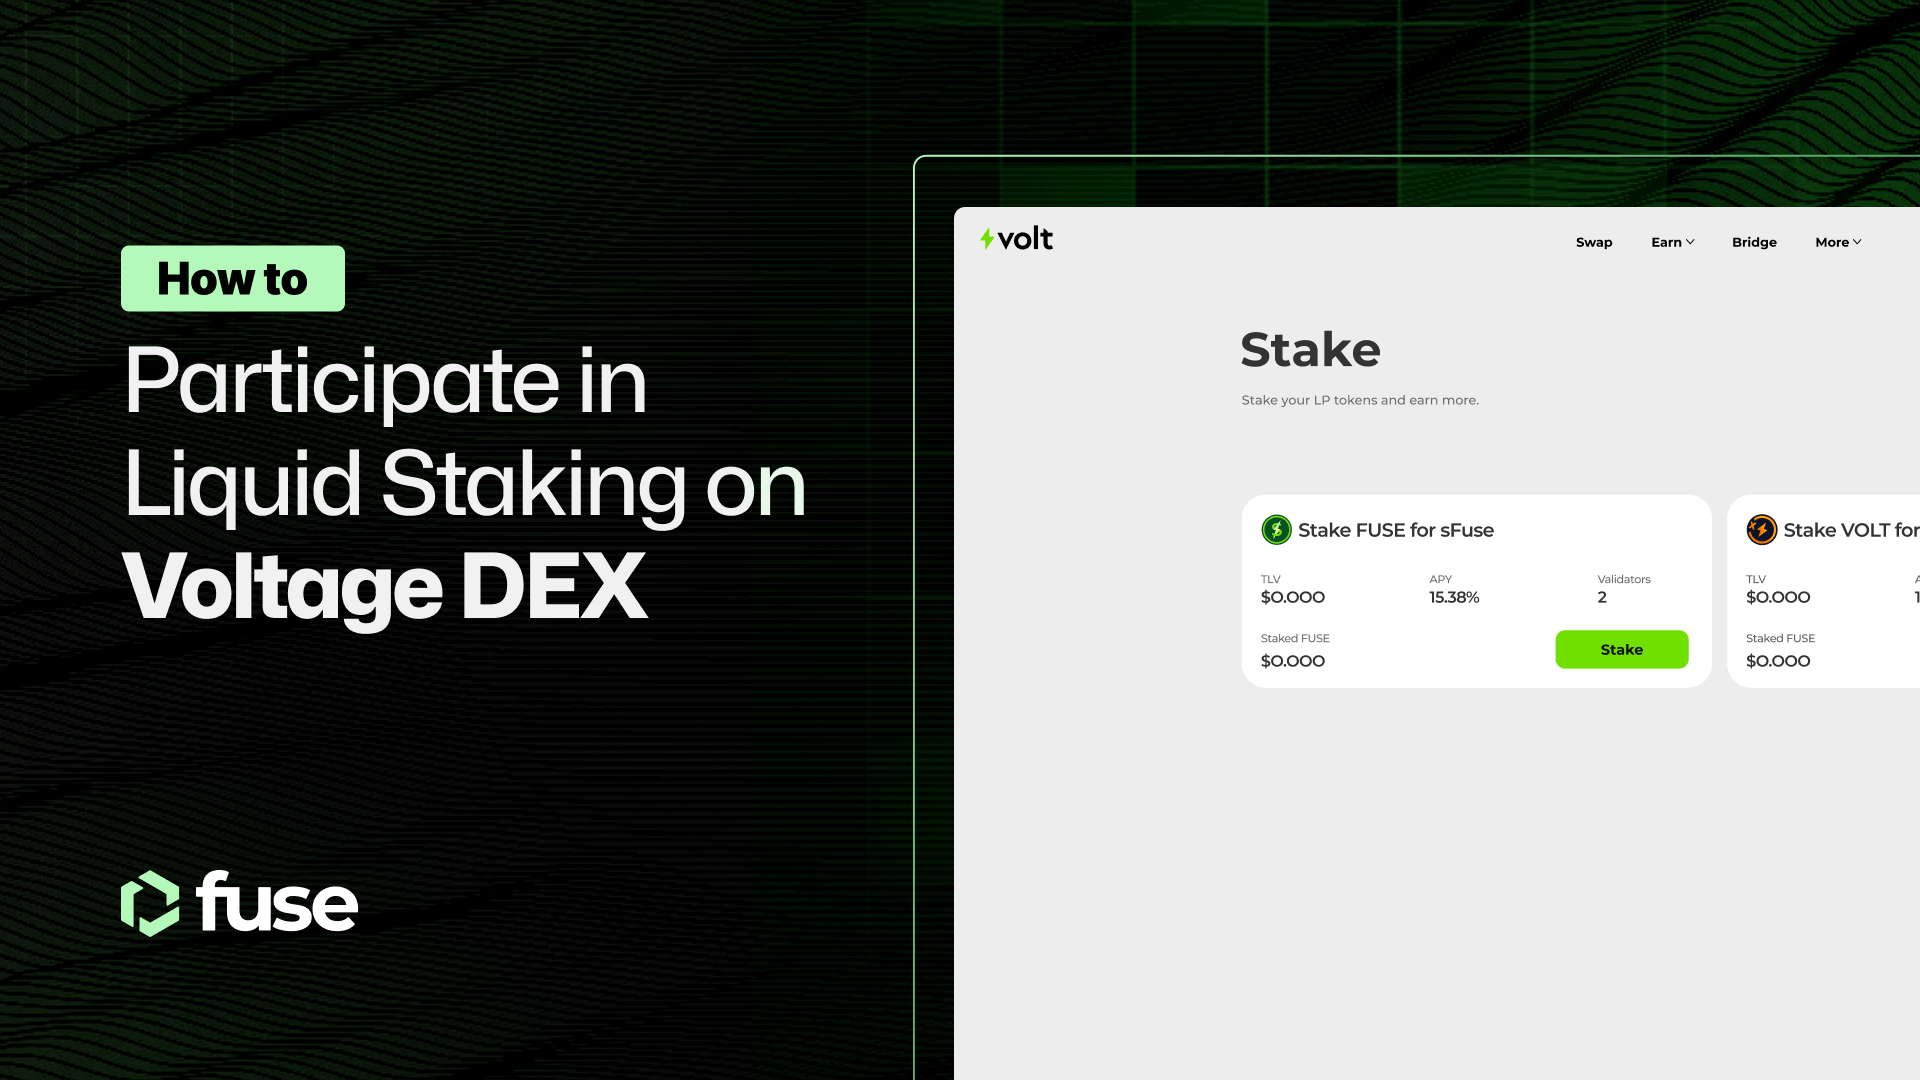 How to participate in liquid staking on Voltage Finance DEX